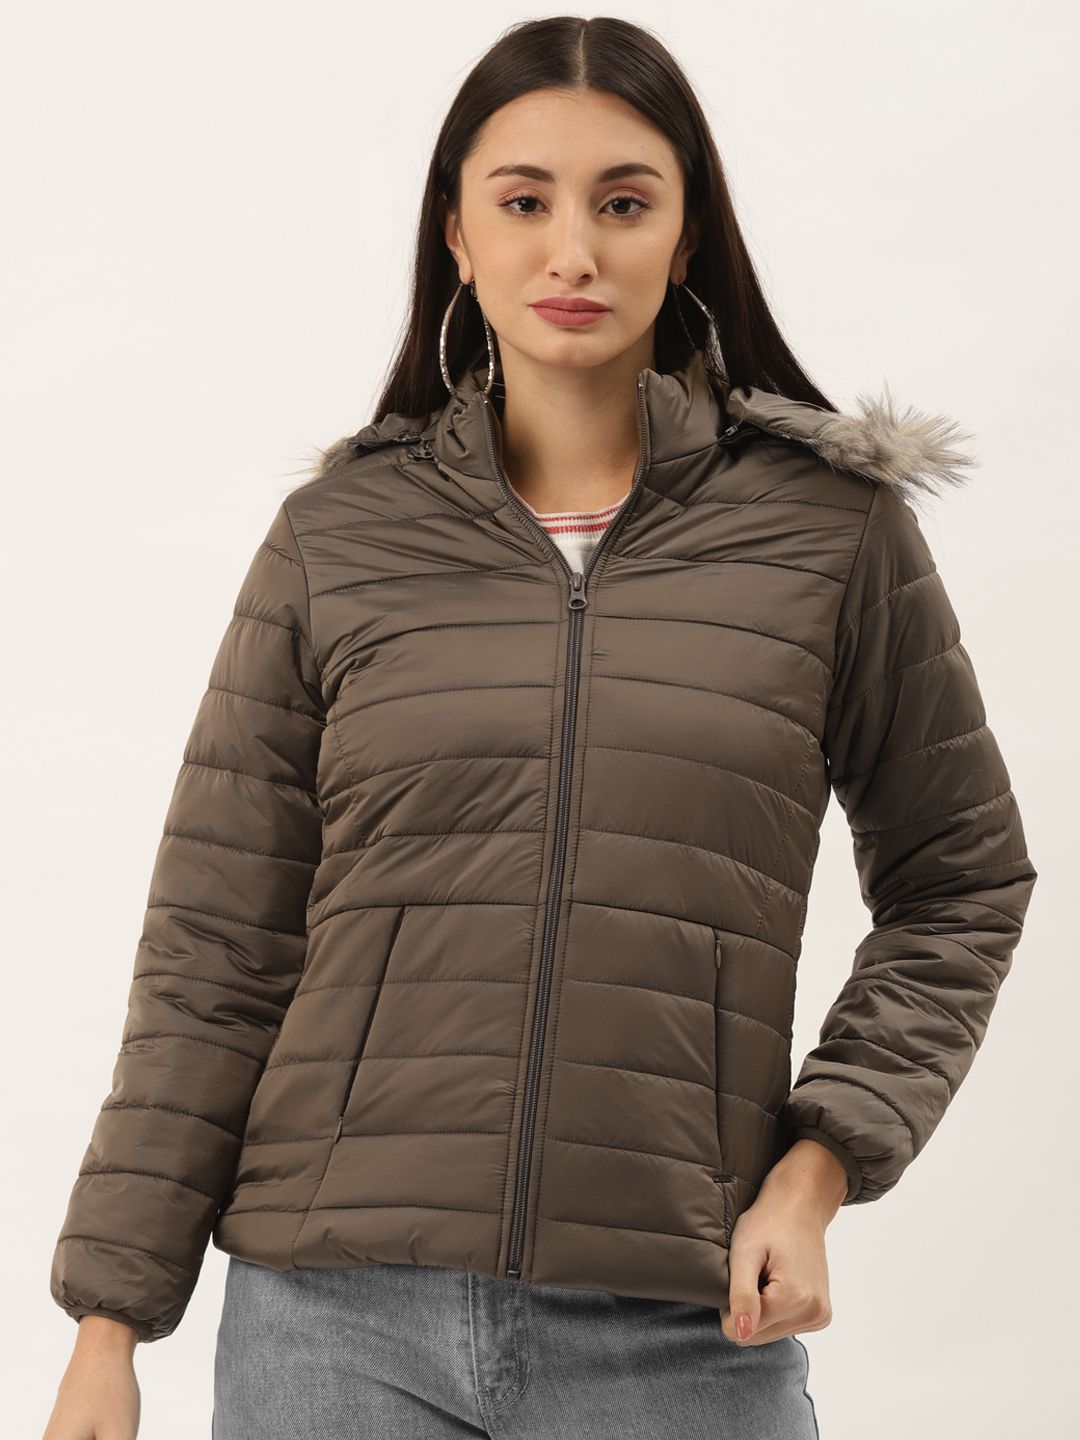 Duke Women Brown Solid Parka Jacket with Detachable Hood Price in India